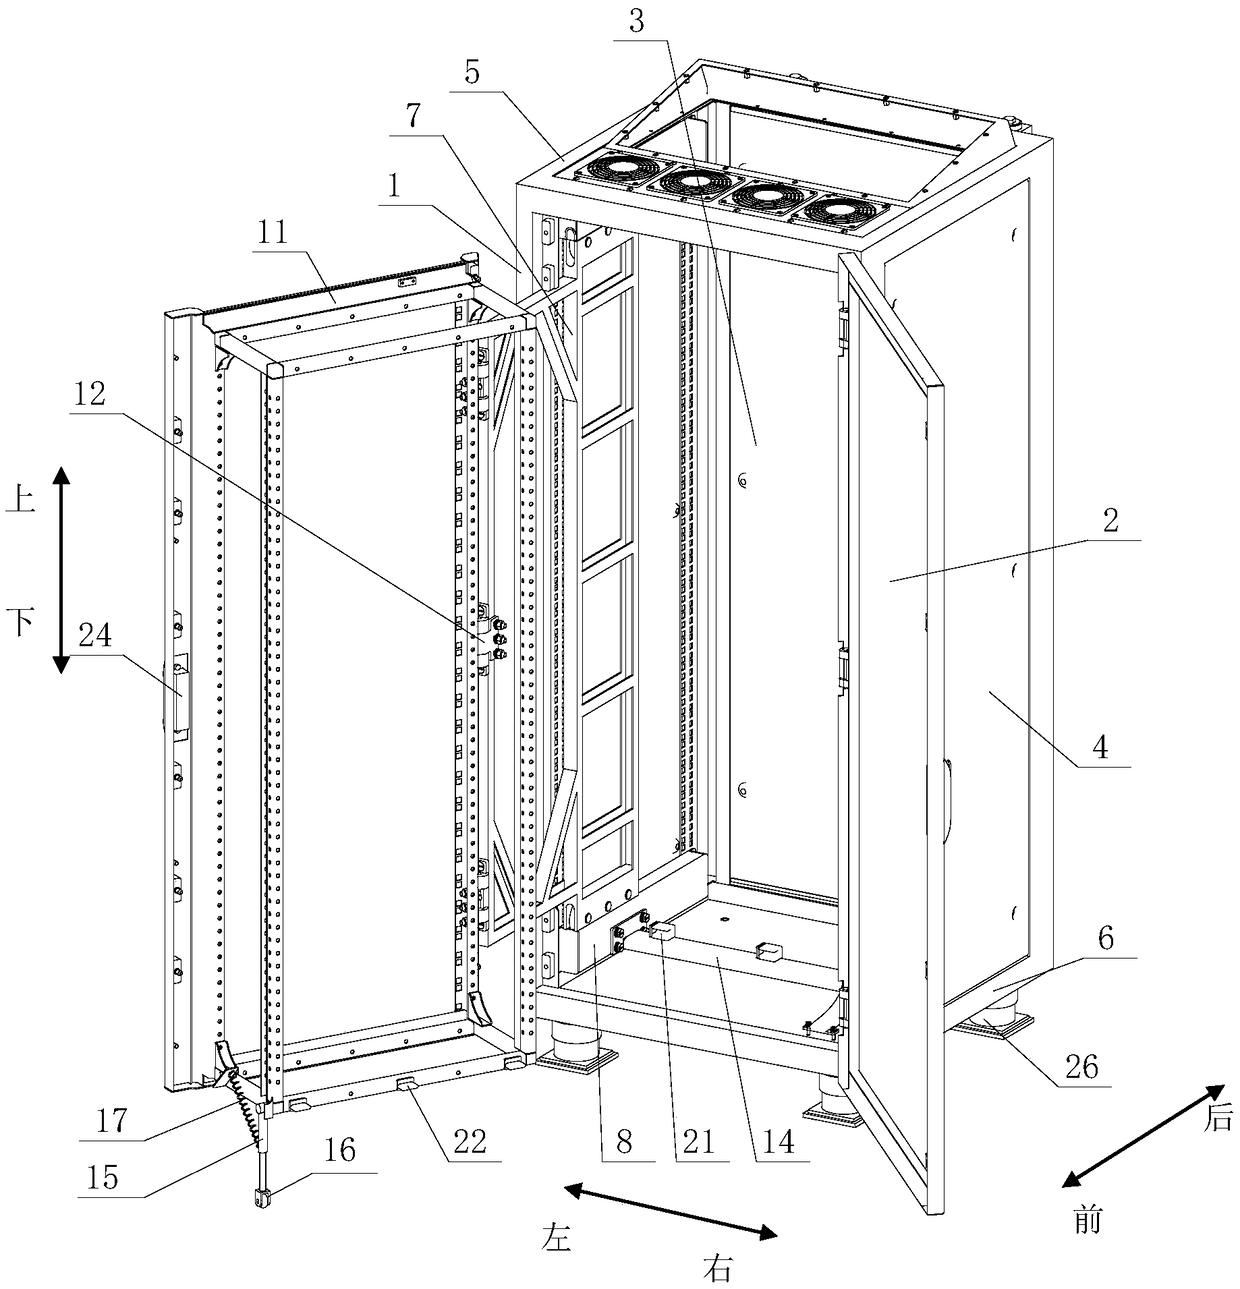 Cradle cabinet for pull-type radar electronic device